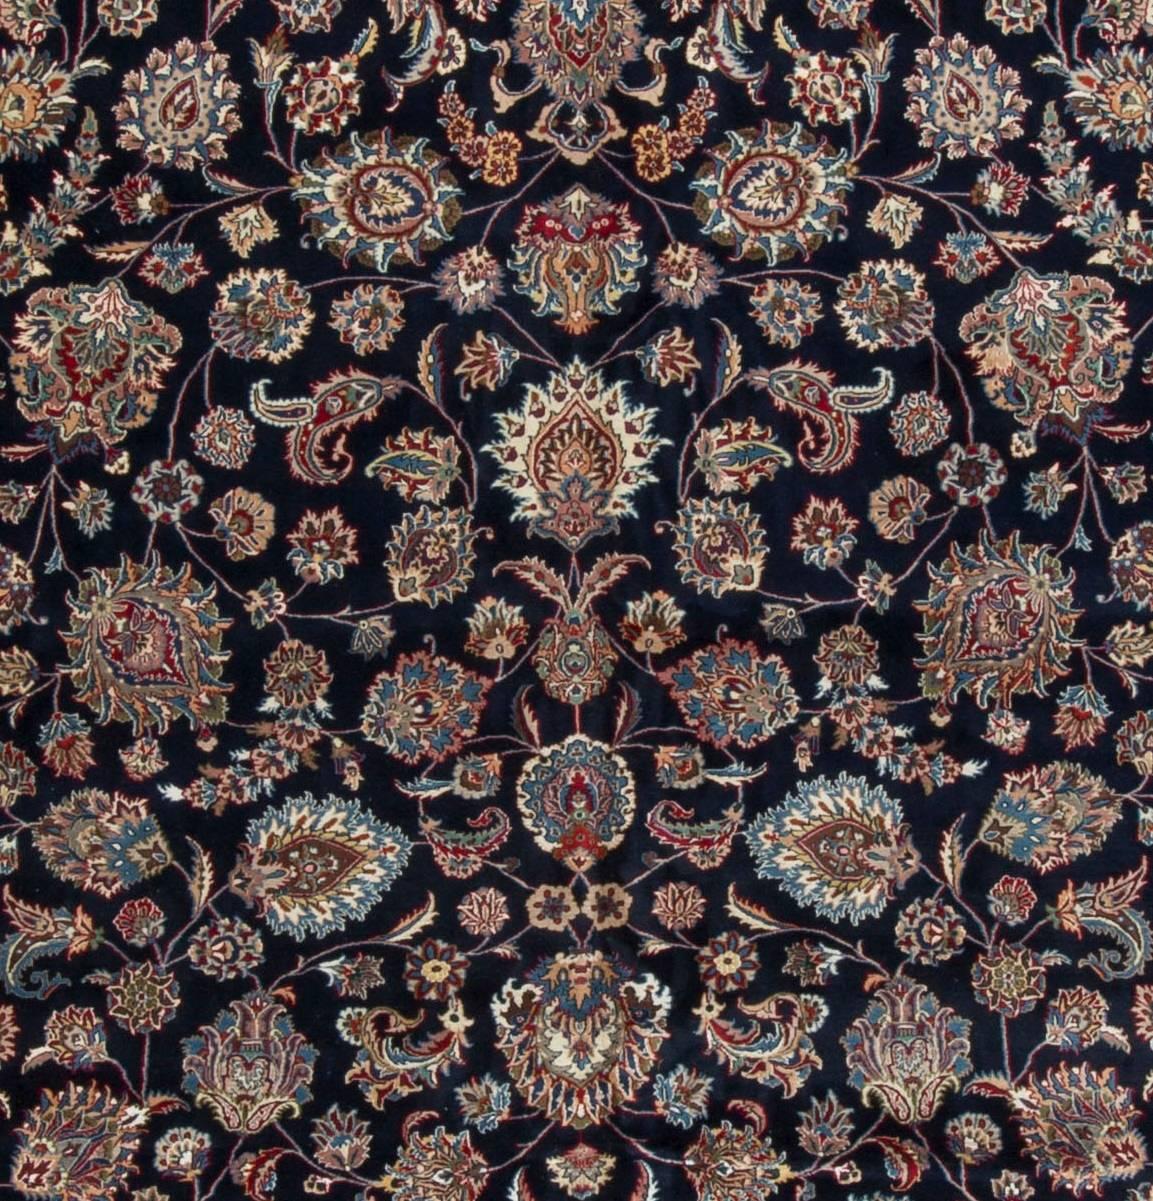 Large Vintage Persian Semnan Rug circa 1940. The deep navy field filed with beautifully flower heads in a variety of colors woven in amazing detail that requires skills only learned over many years. The ivory border completes a perfect picture for